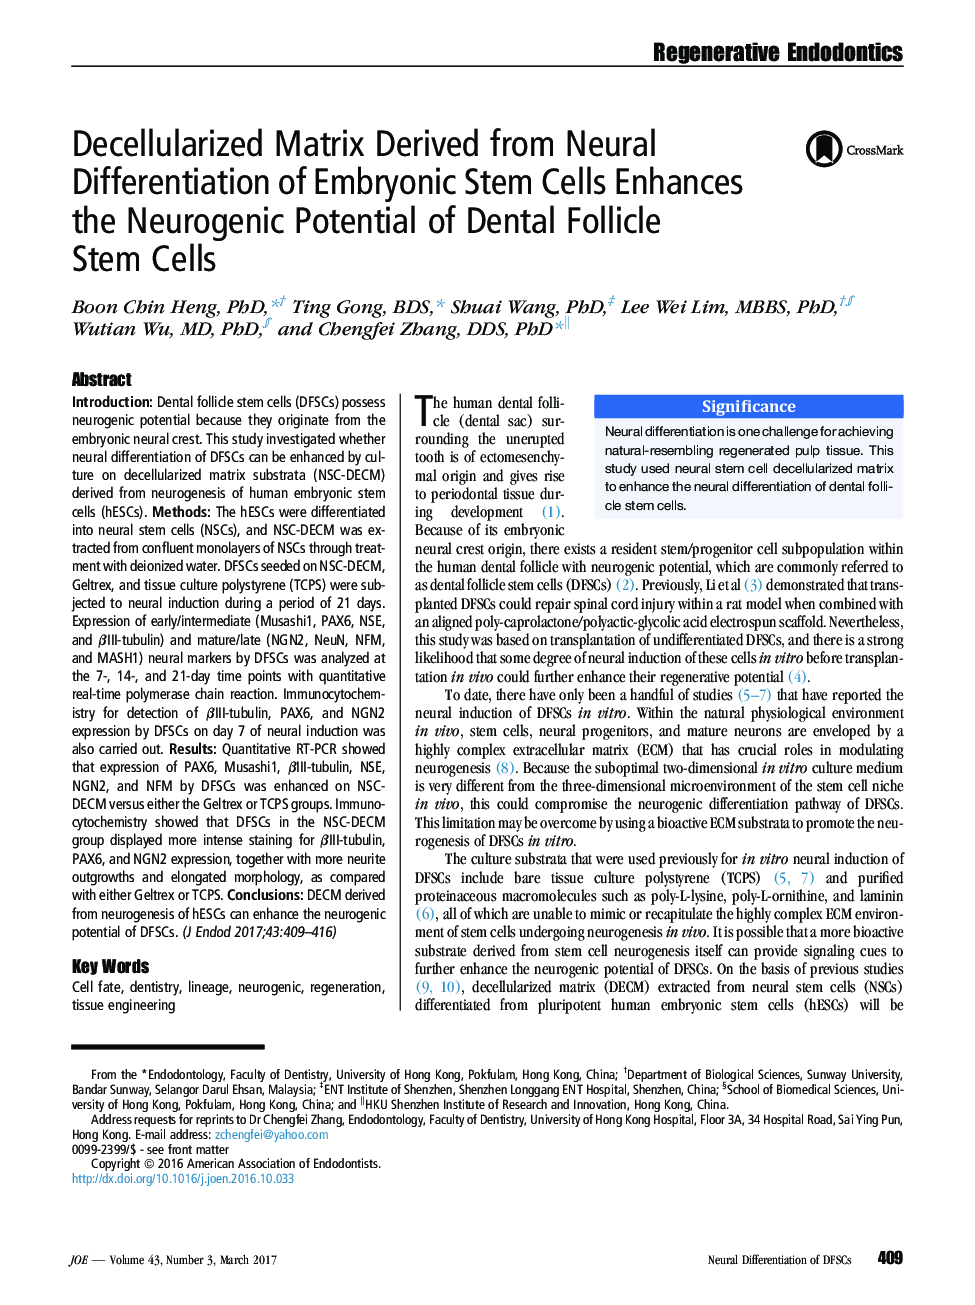 Decellularized Matrix Derived from Neural Differentiation of Embryonic Stem Cells Enhances the Neurogenic Potential of Dental Follicle Stem Cells